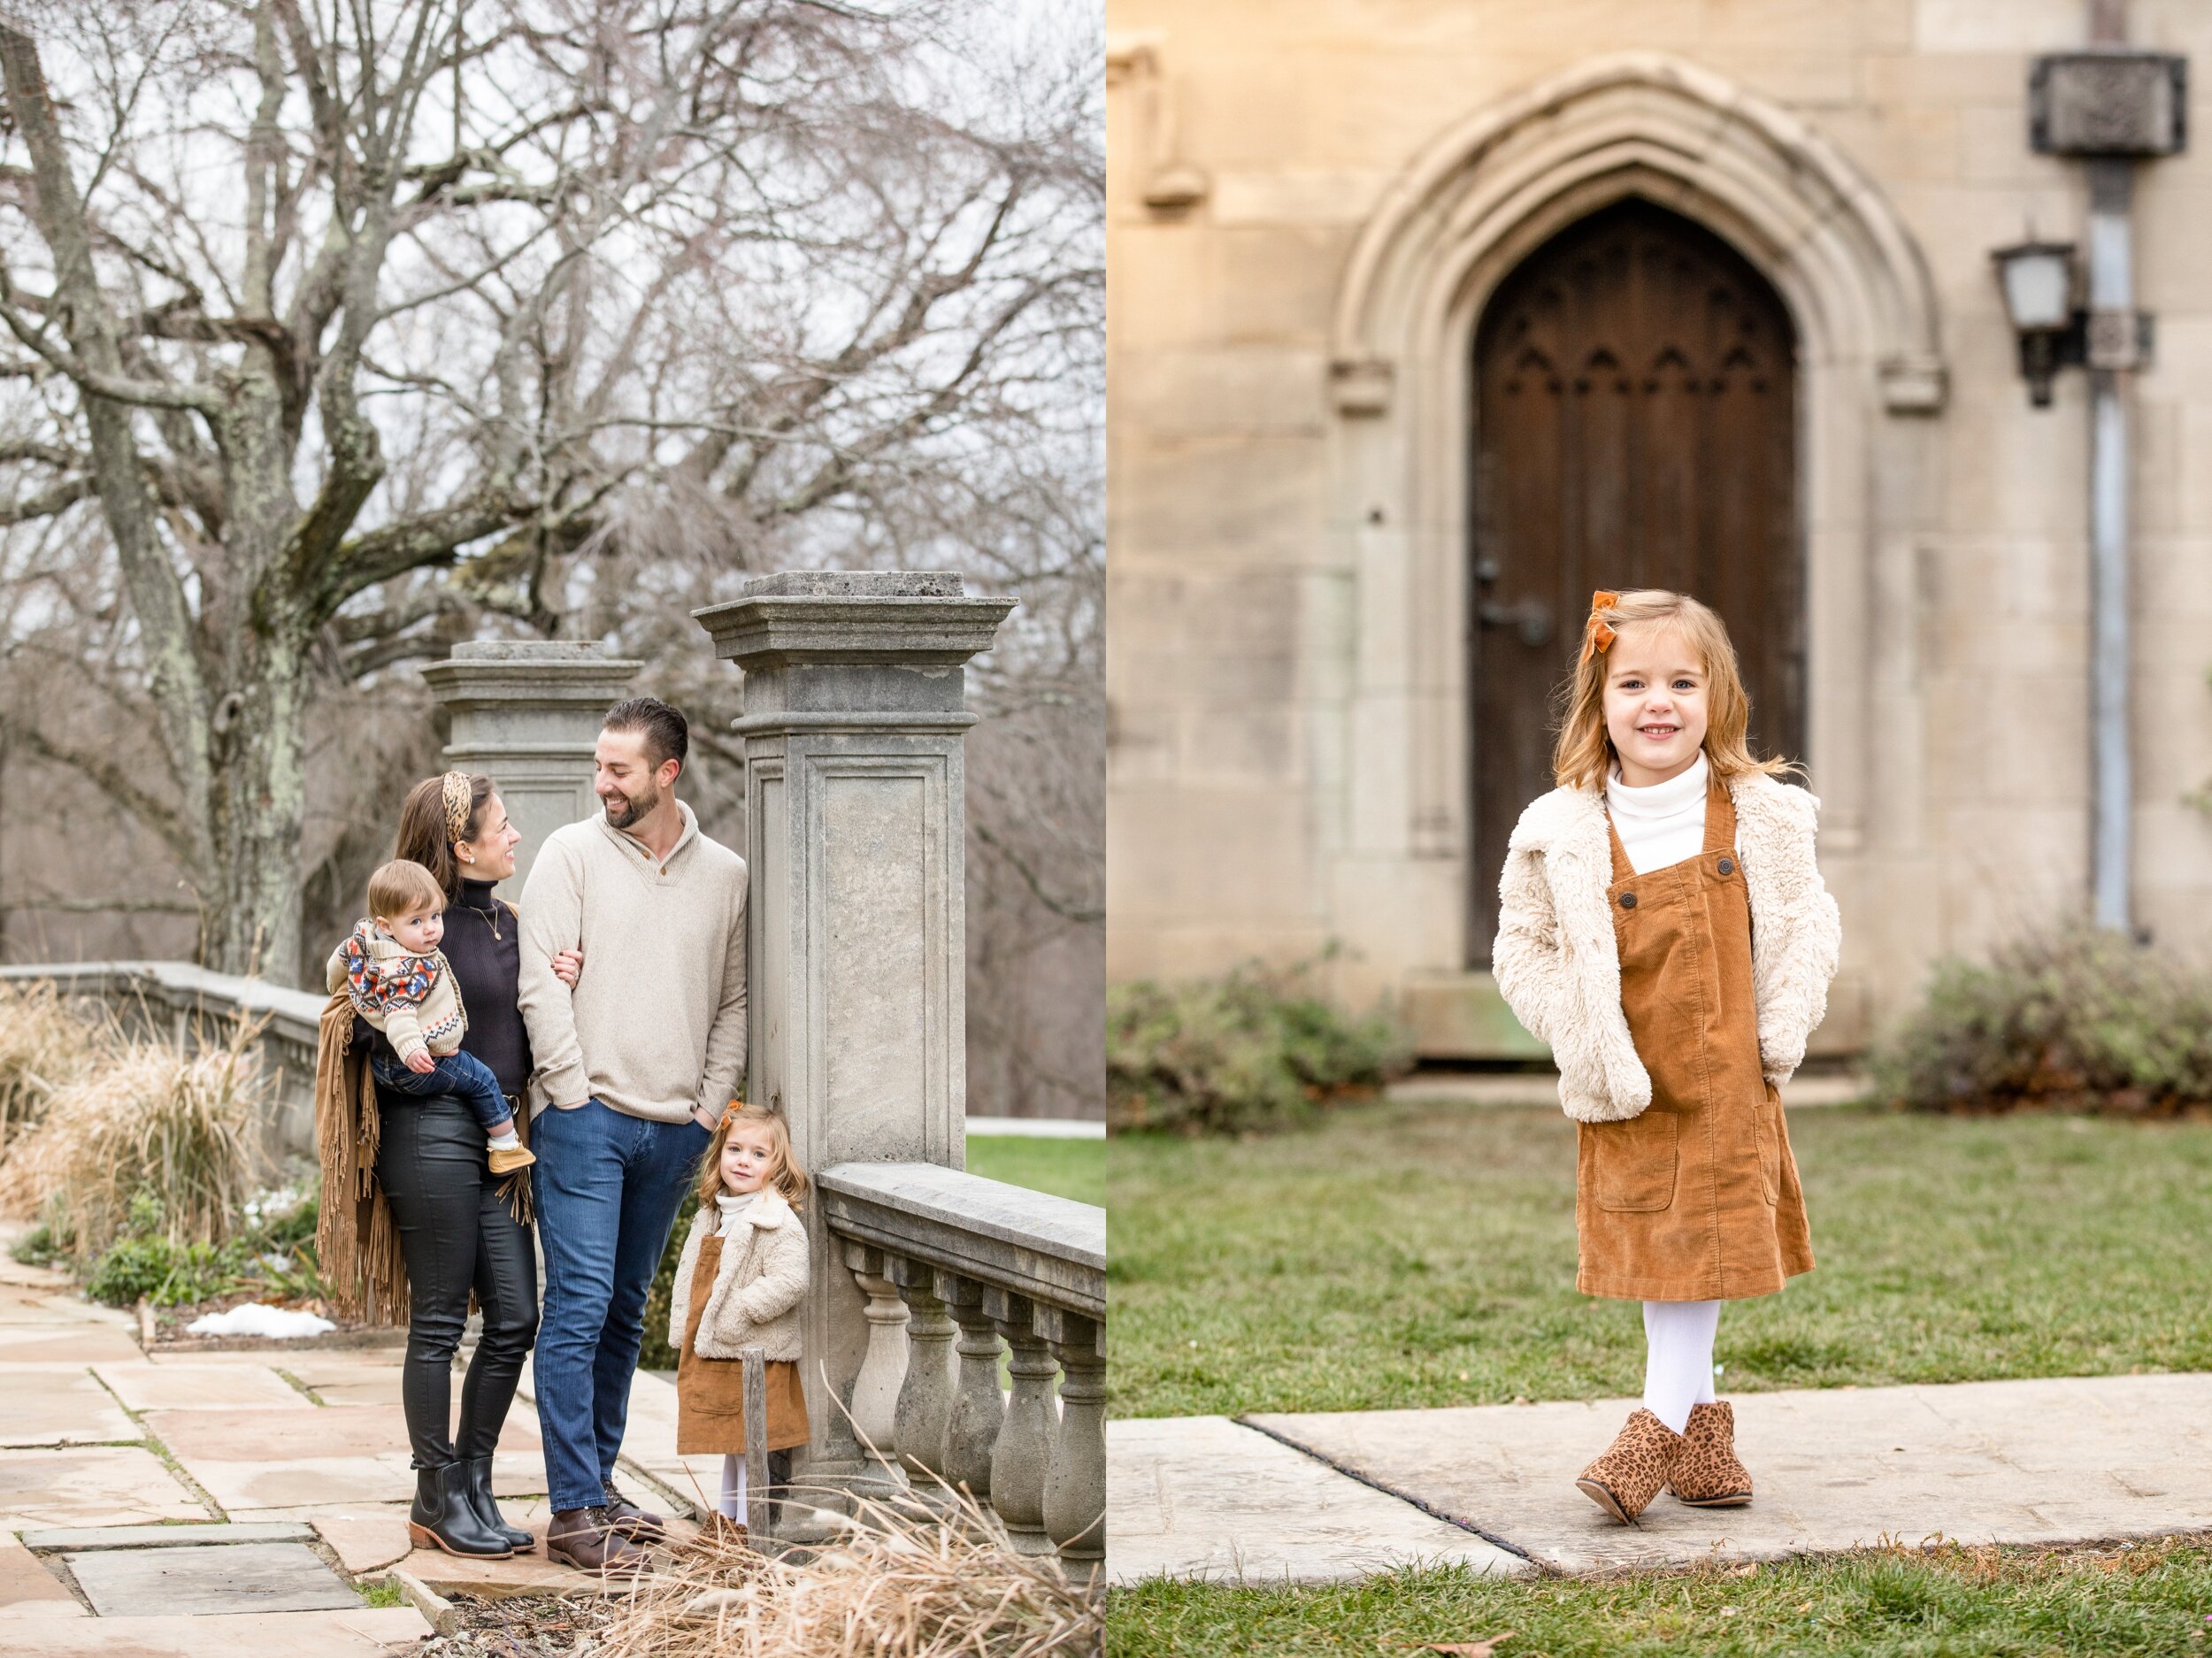 pittsburgh family photographer, pittsburgh family photos, hartwood acres family photos, zelienople photographer, cranberry township photographer, family photo outfit ideas